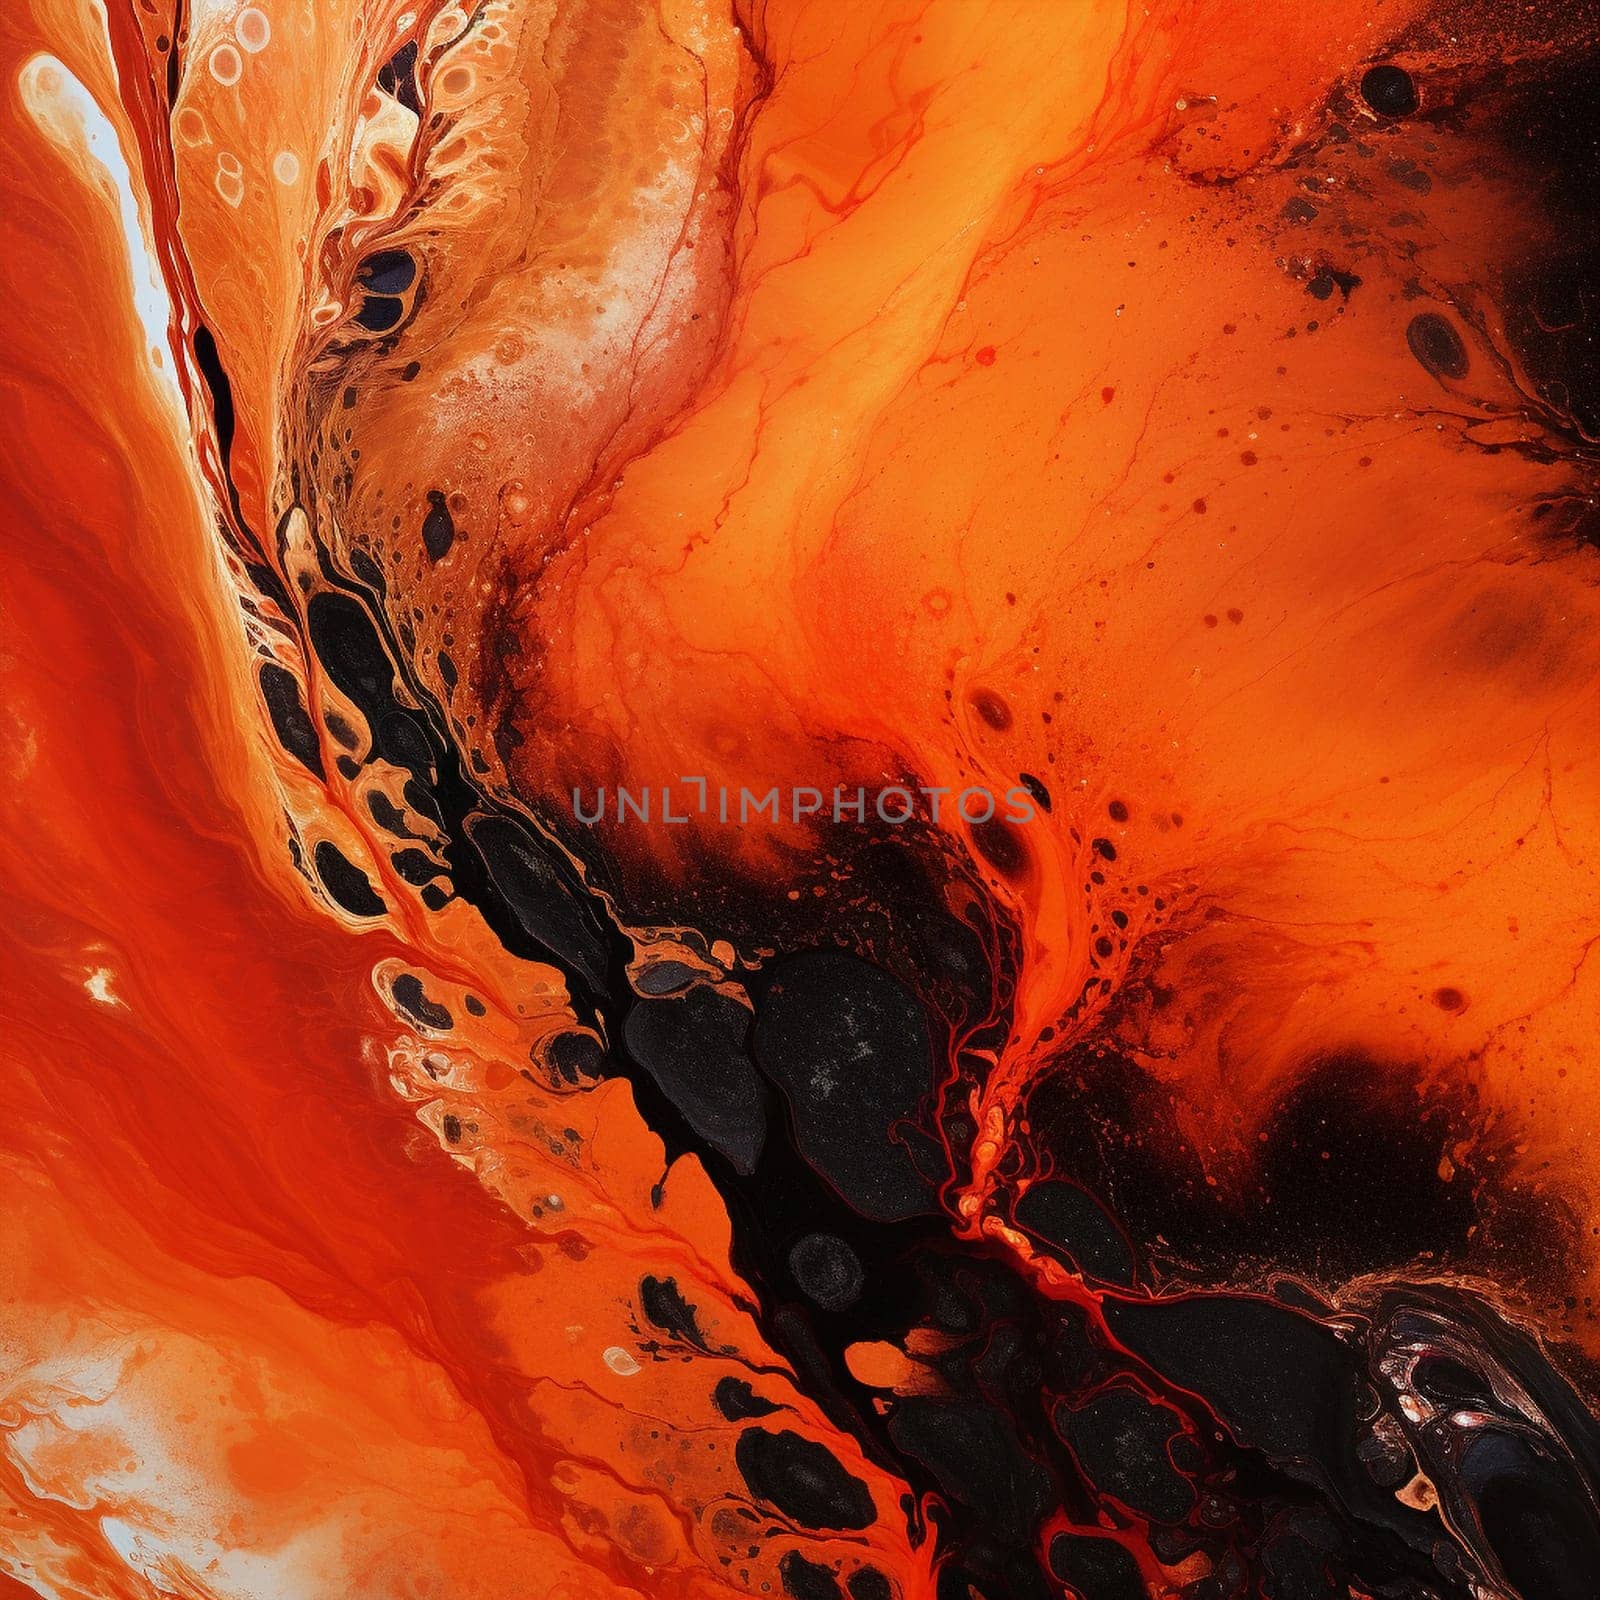 Immerse yourself in the awe-inspiring intensity of a volcanic eruption with this striking image in the art style of abstract minimalism. This surreal landscape captures the raw power and destructive magnificence of nature's fiery orchestra. Rivers of molten lava flow gently, resembling a symphony of vibrant oranges, fiery reds, and glowing yellows. The explosive force of the eruption is balanced with a sense of enchanting beauty, showcasing the mesmerizing spectacle that unfolds when nature plays its fiery symphony.